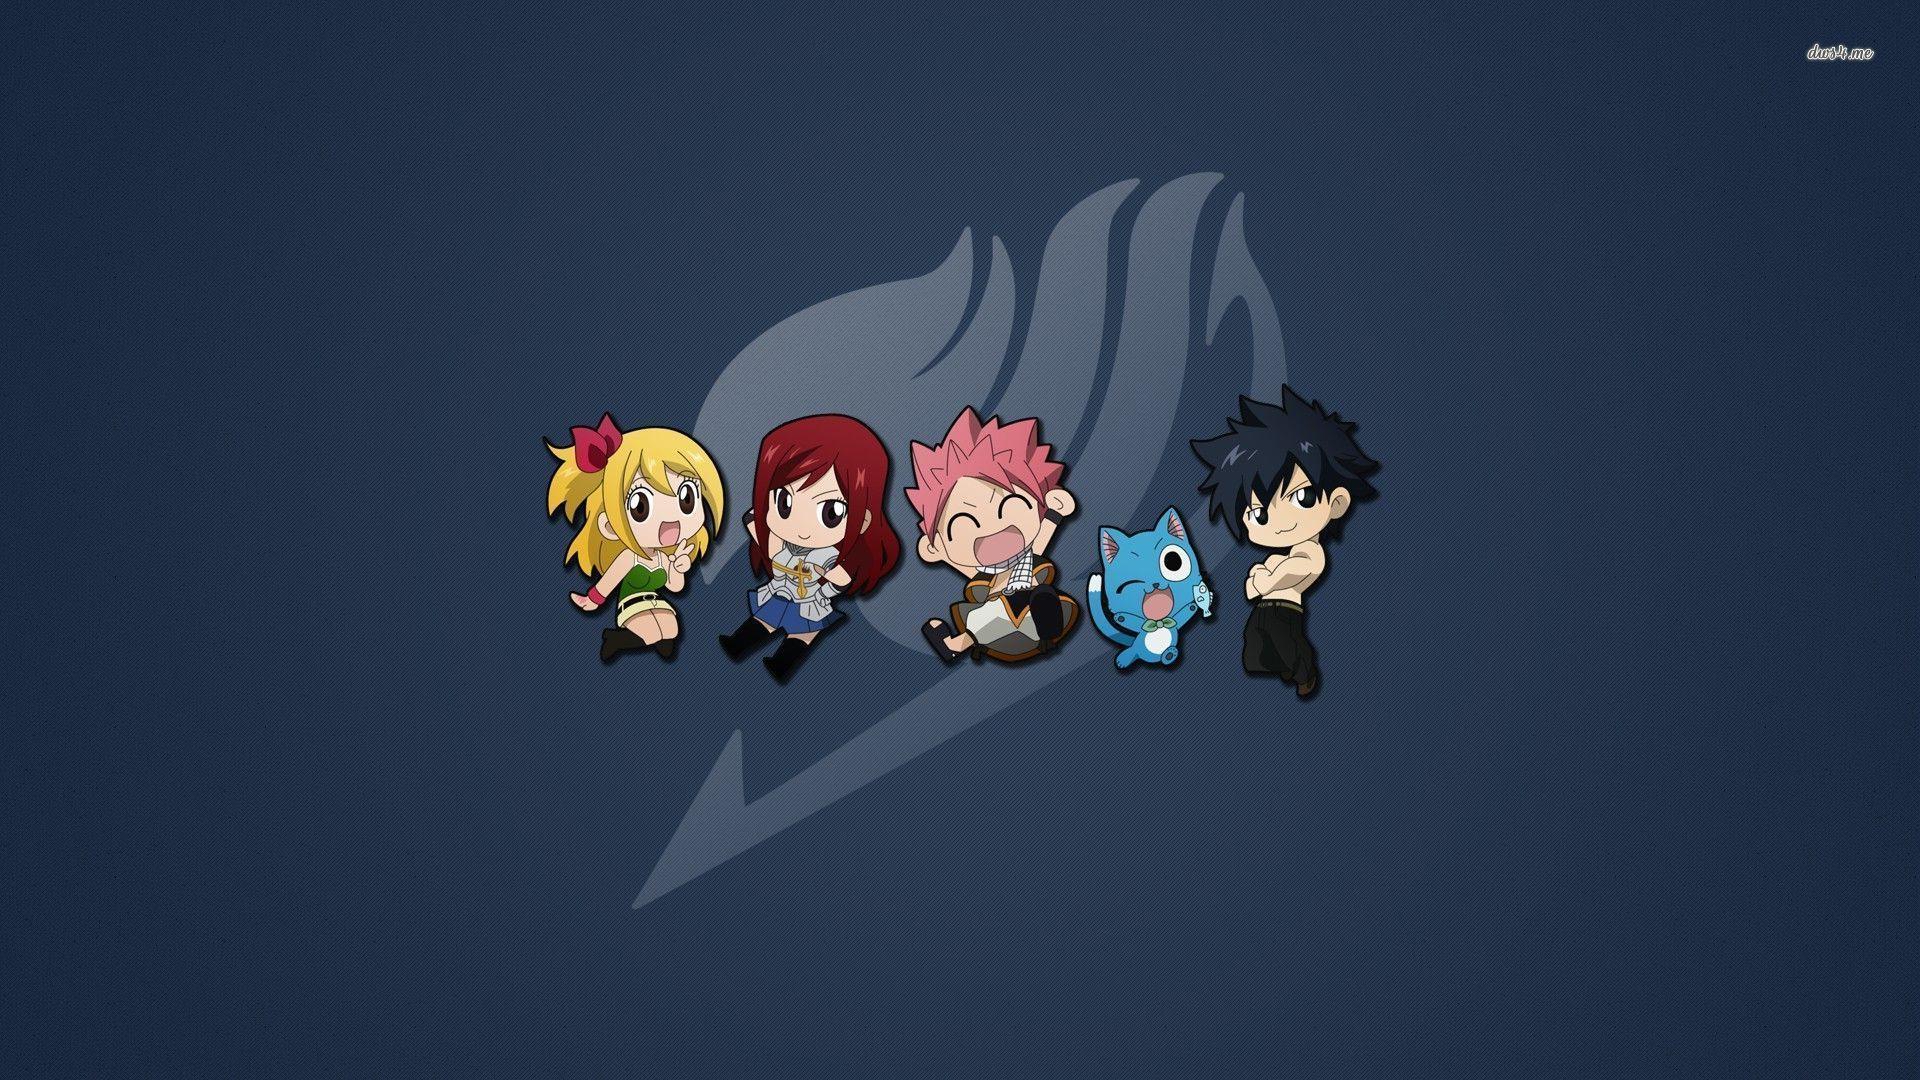 Fairy Tail small characters wallpaper wallpaper